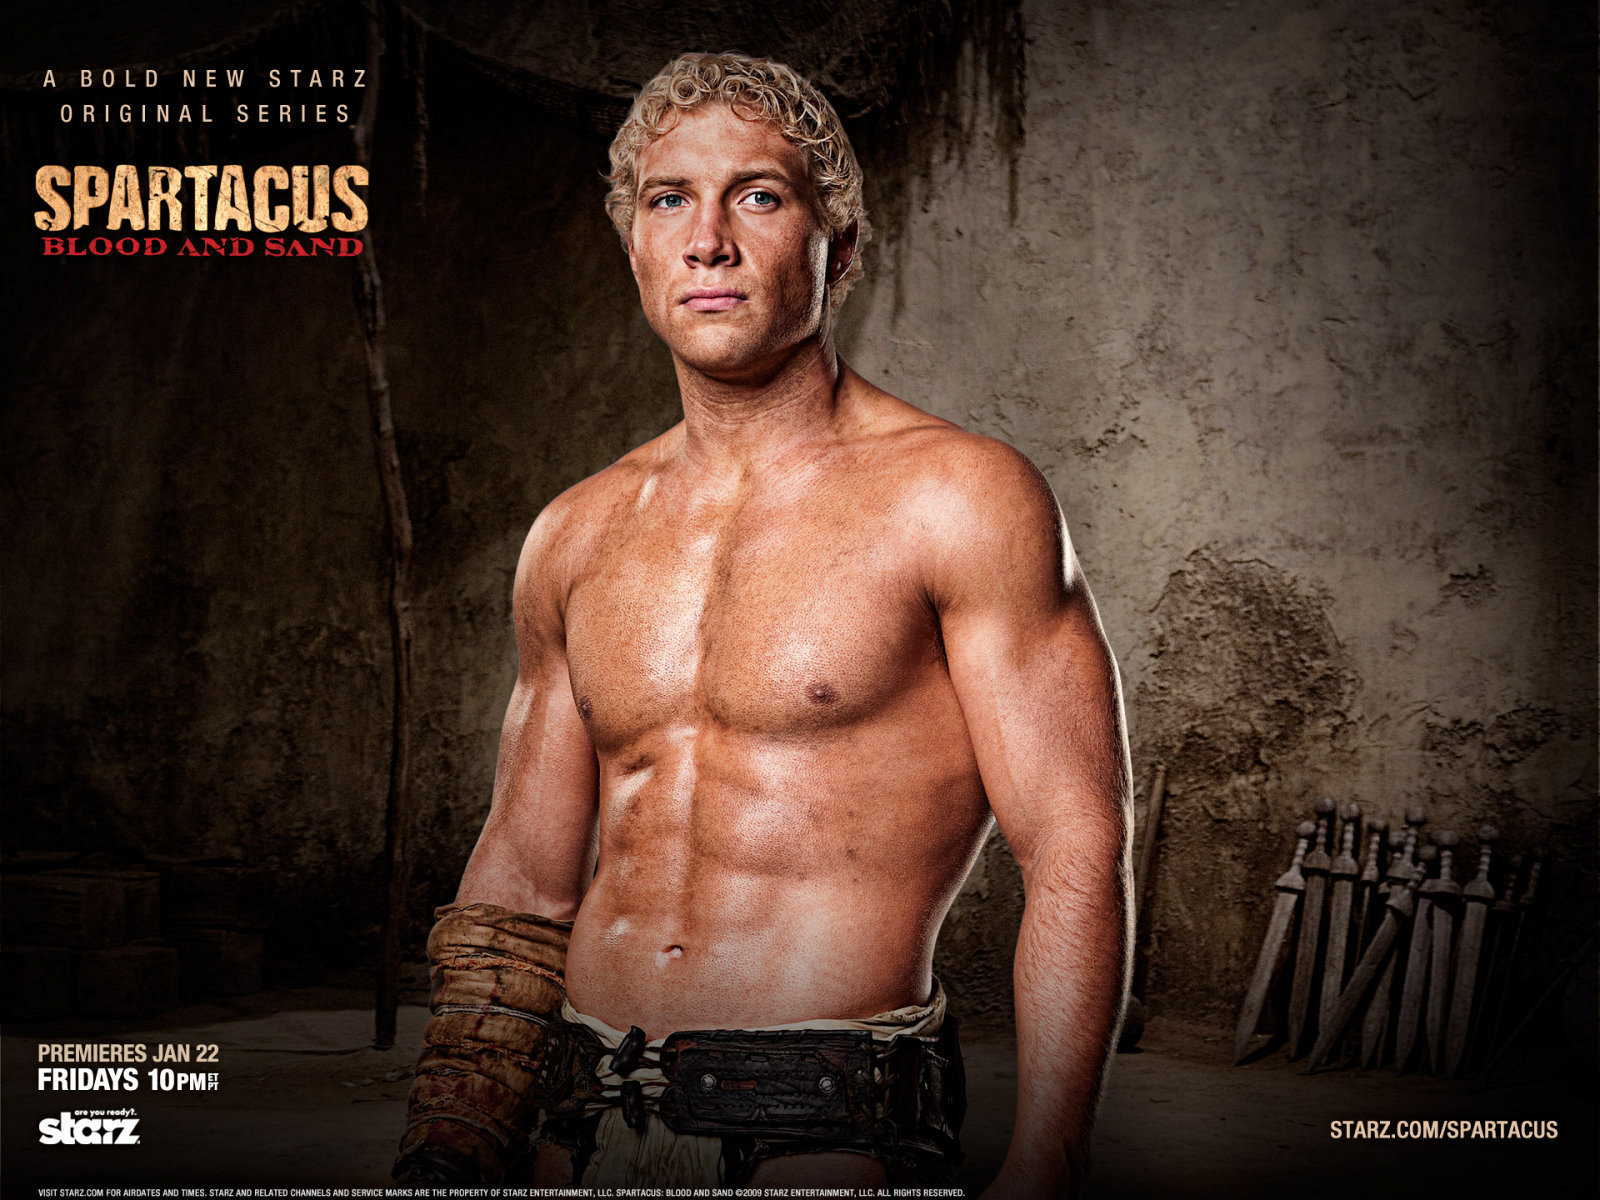 http://images4.fanpop.com/image/photos/17100000/Varro-spartacus-blood-and-sand-17112015-1600-1200.jpg